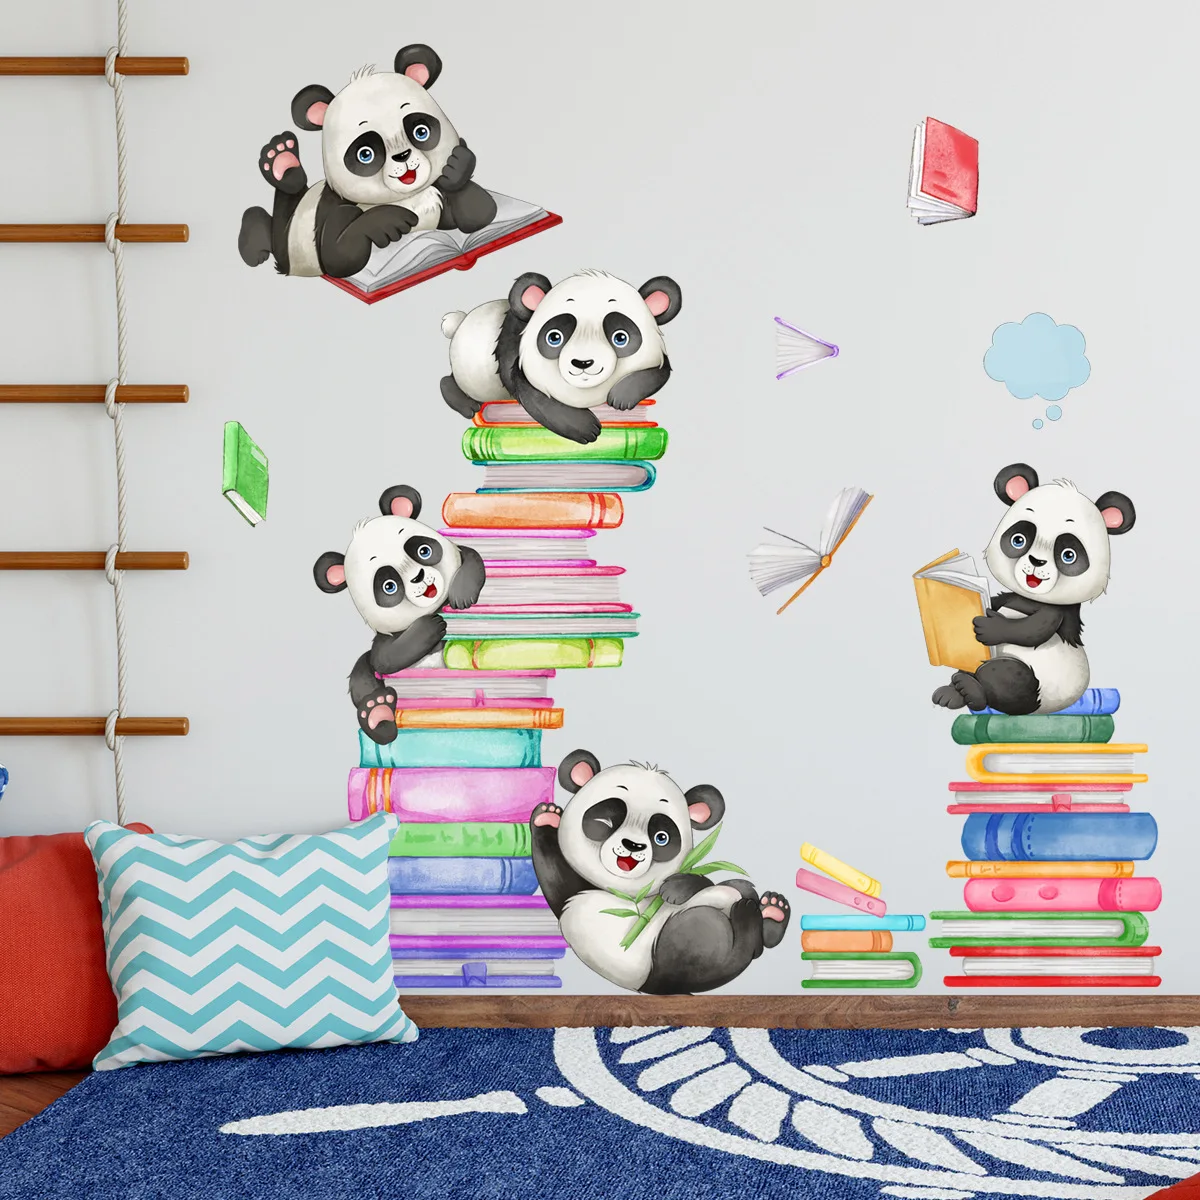 2pcs Animal Panda Book Cartoon Wall Stickers Dormitory Background Wall Home Decoration Wall Stickers Mural Wallpaper Ms6263